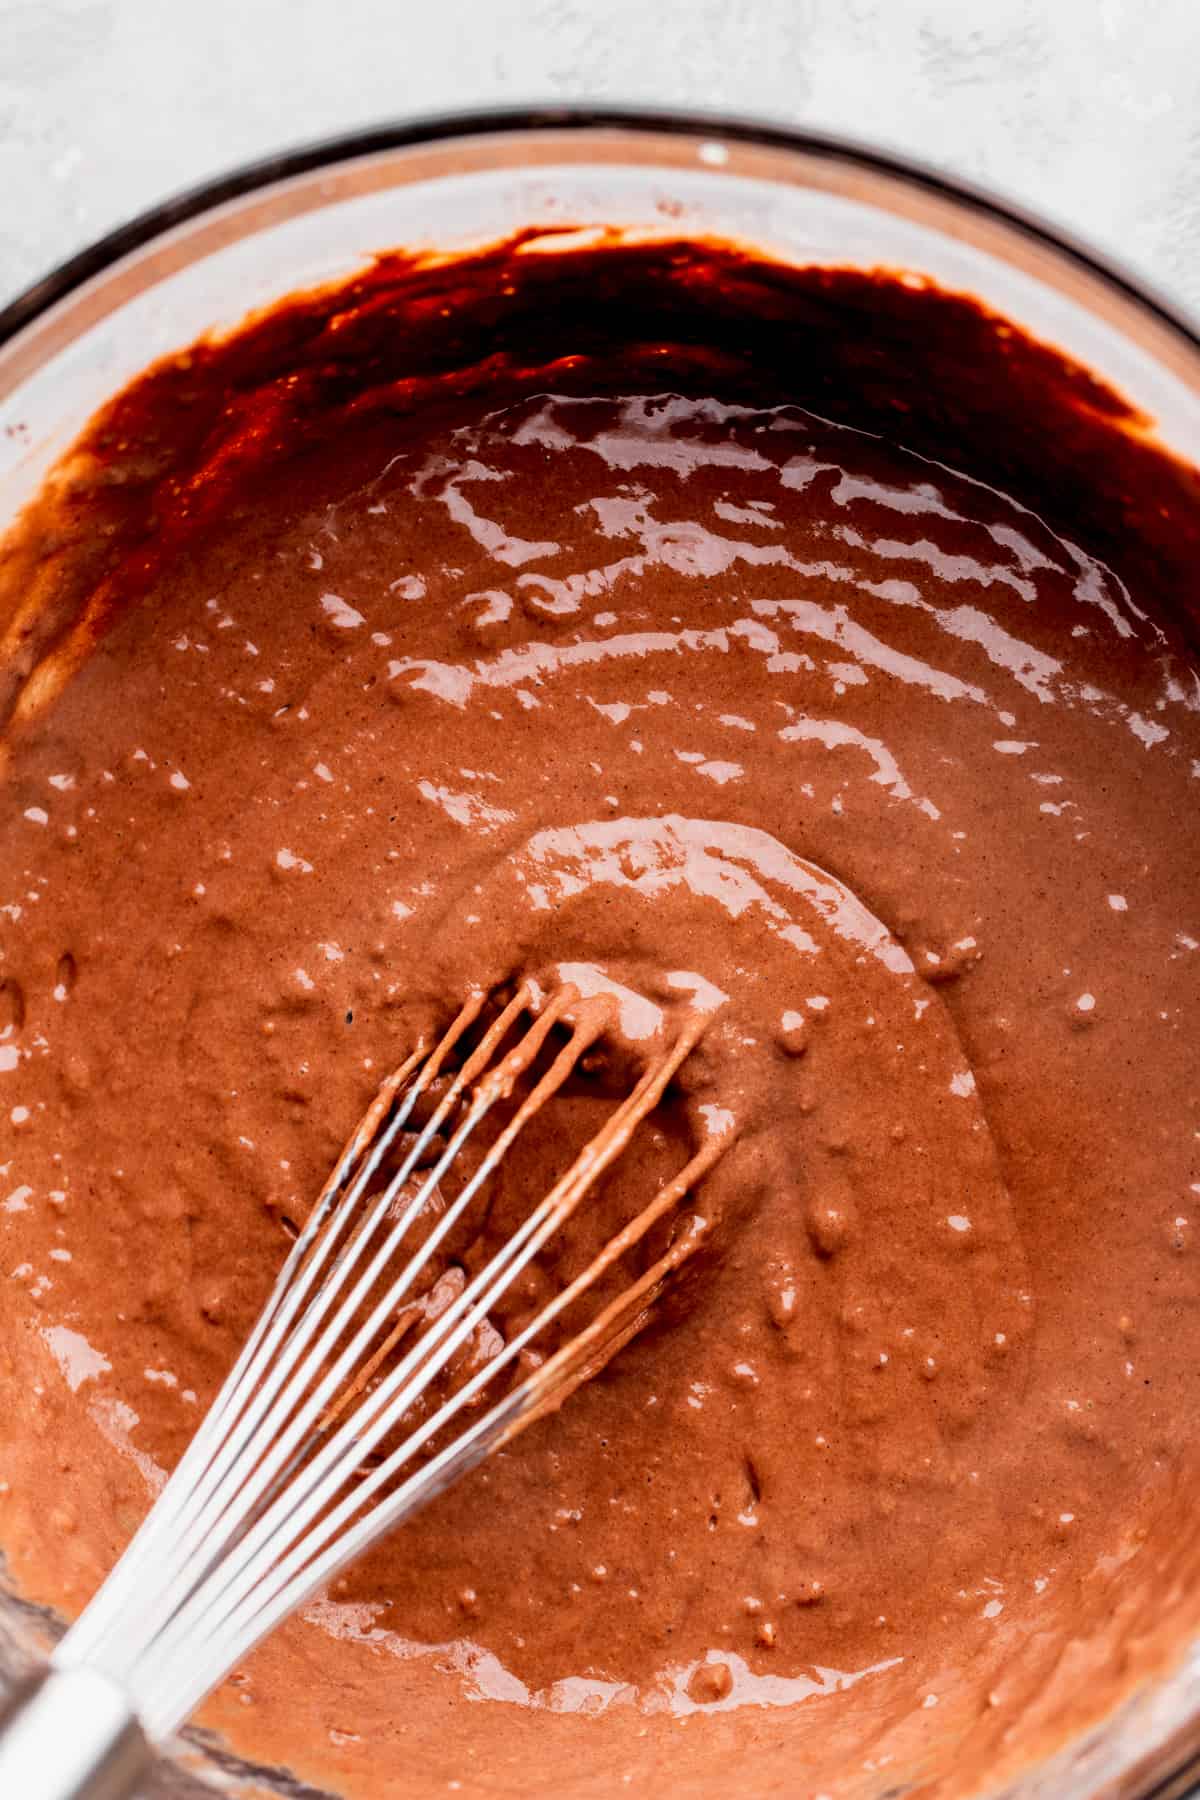 Chocolate pancake batter in a glass bowl.